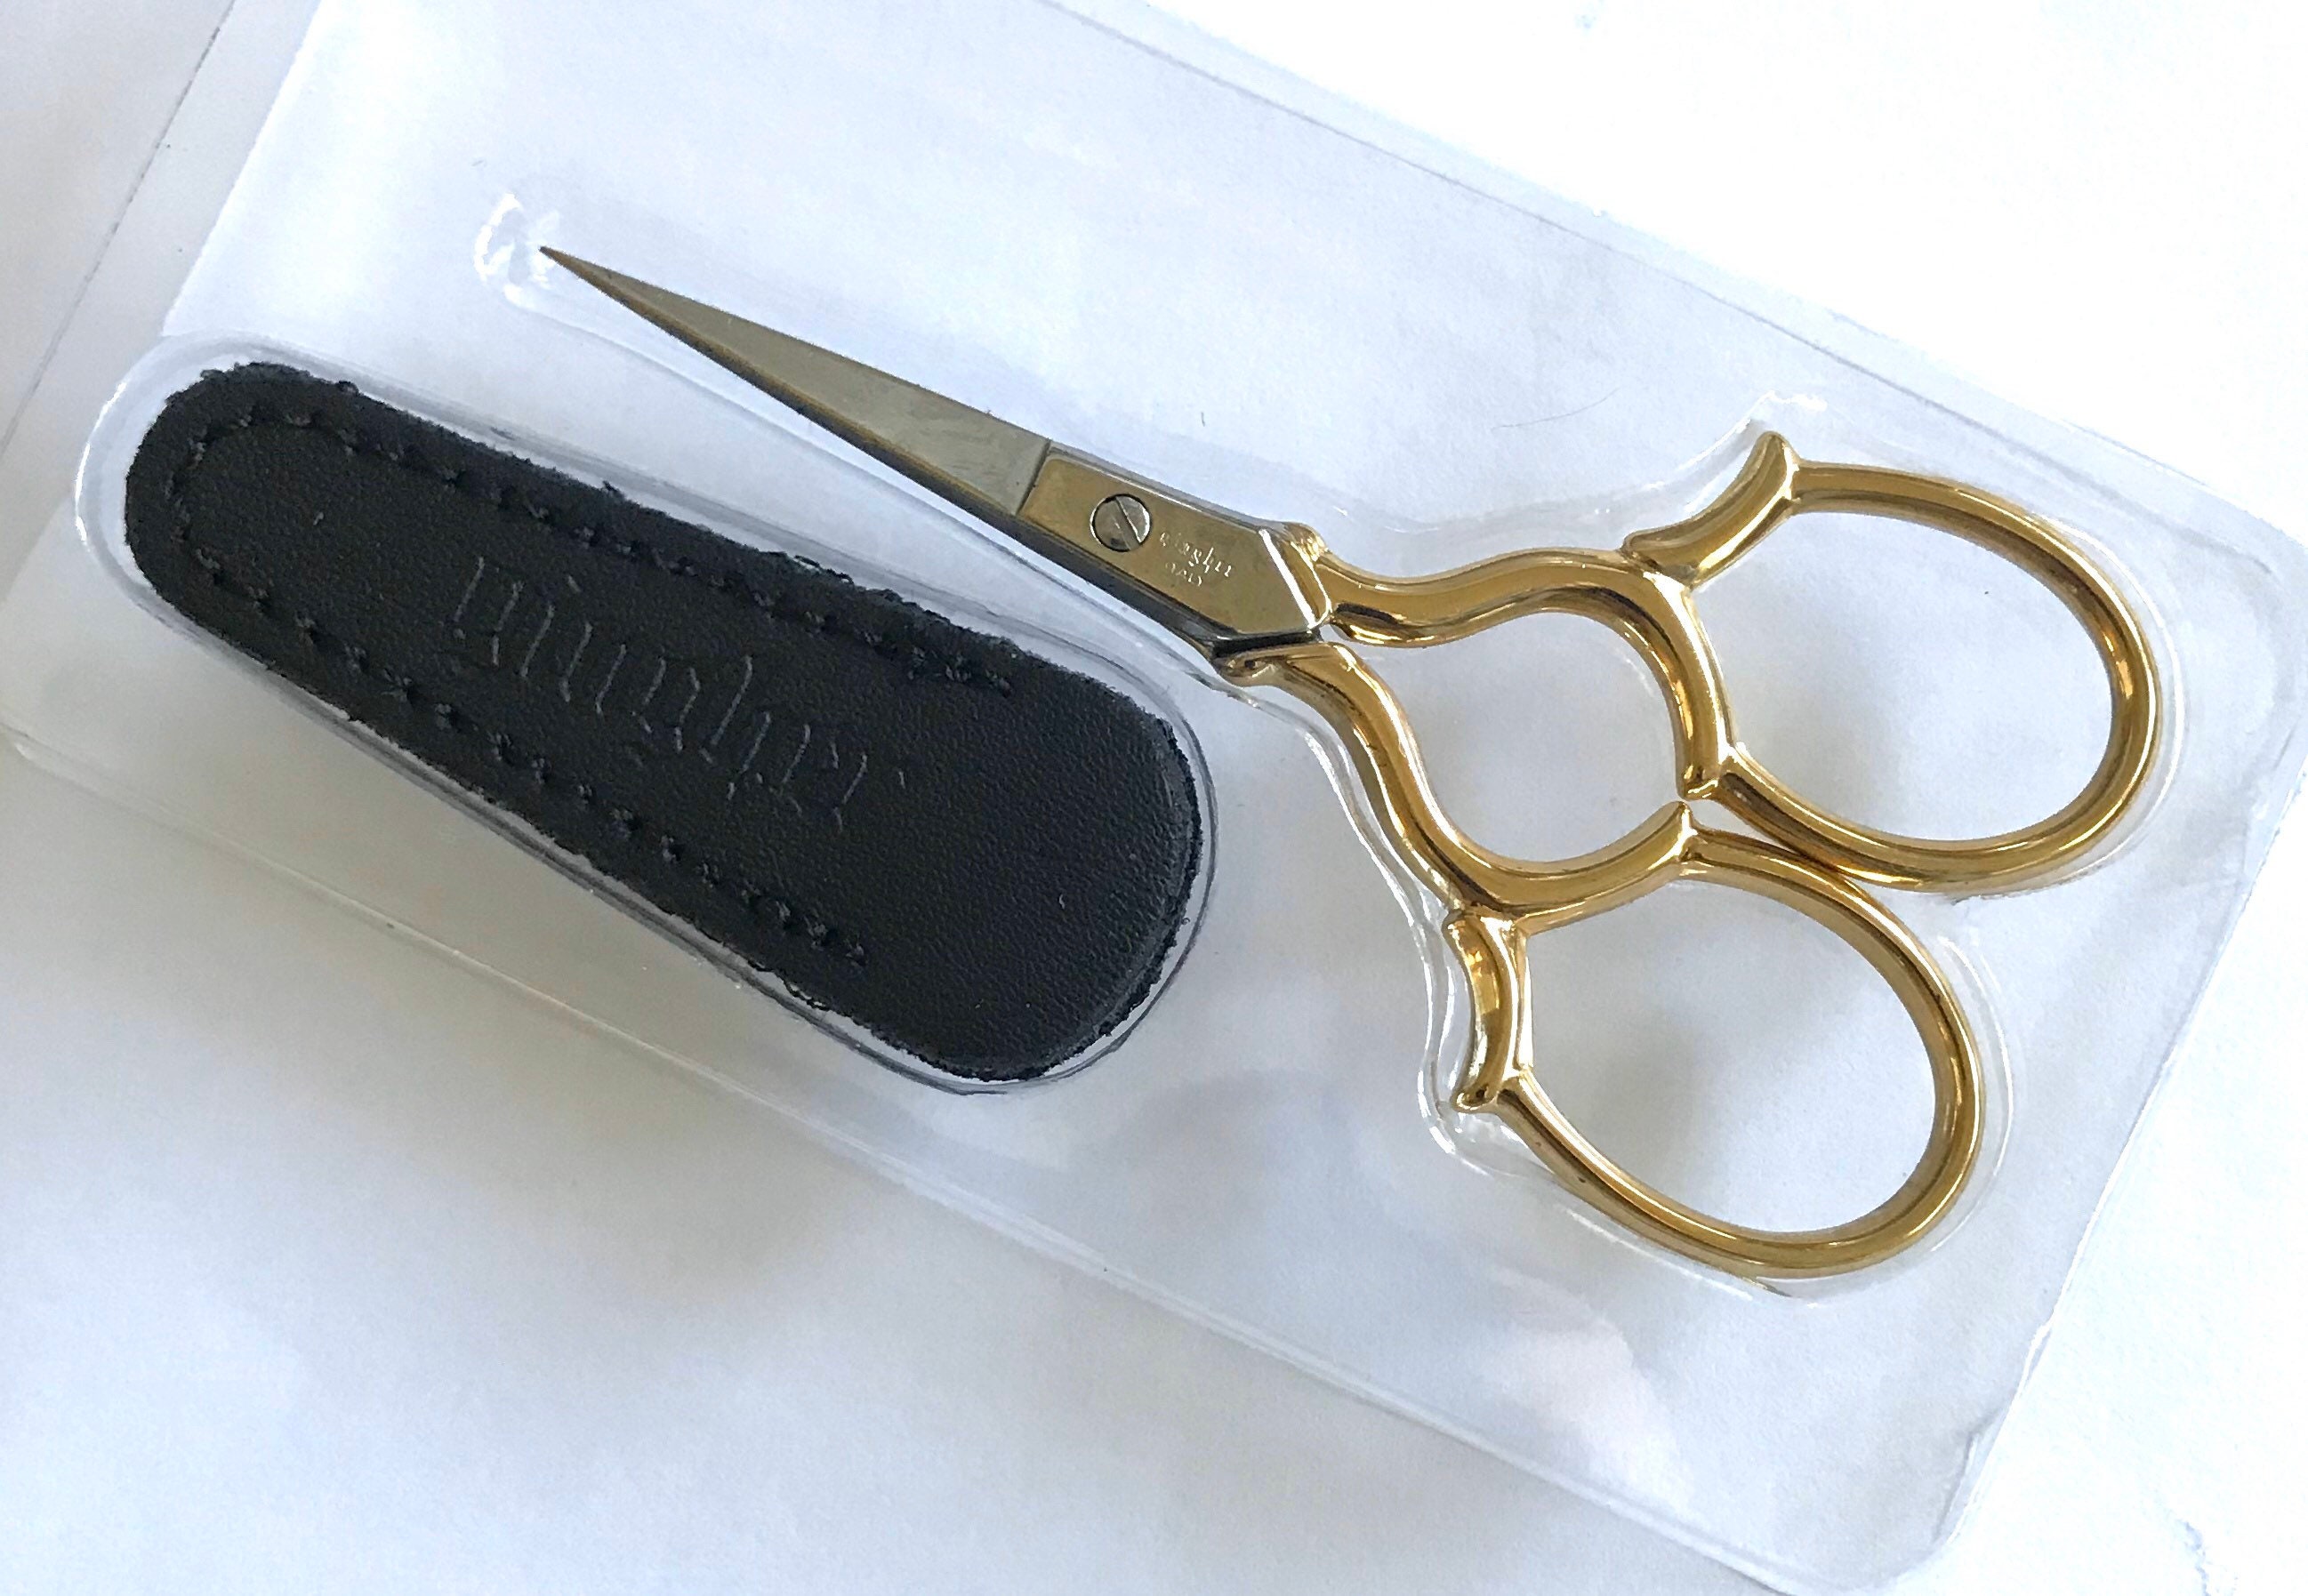 Gingher Gold Handle Epaulette Embroidery Scissors - Stitched Modern